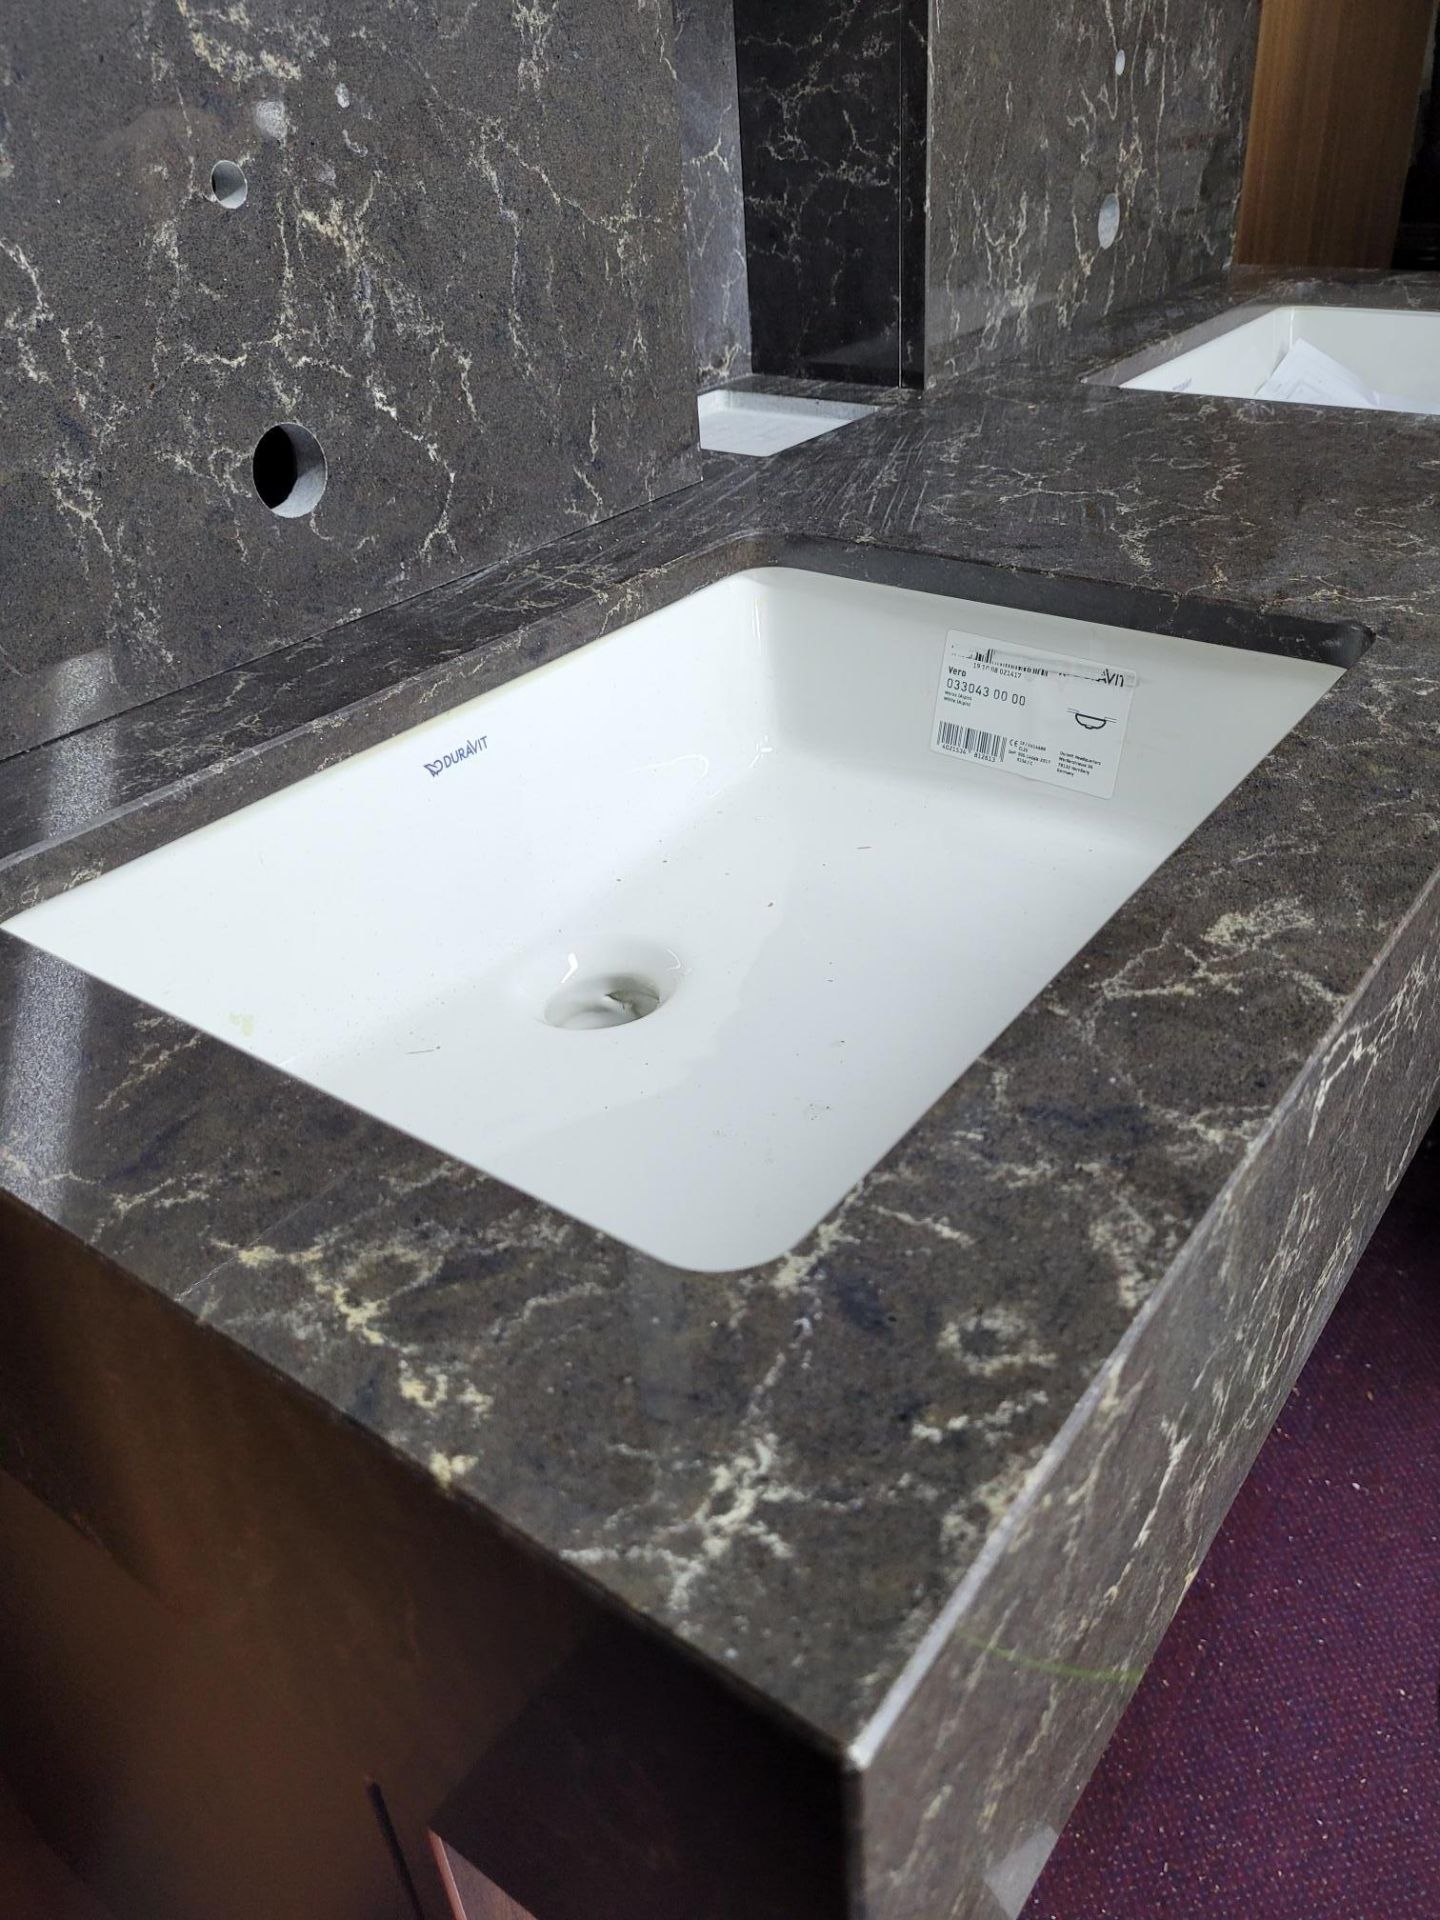 Bespoke twin basin black variegated granite bathroom sink unit, with mirrored cabinets, - Image 5 of 11